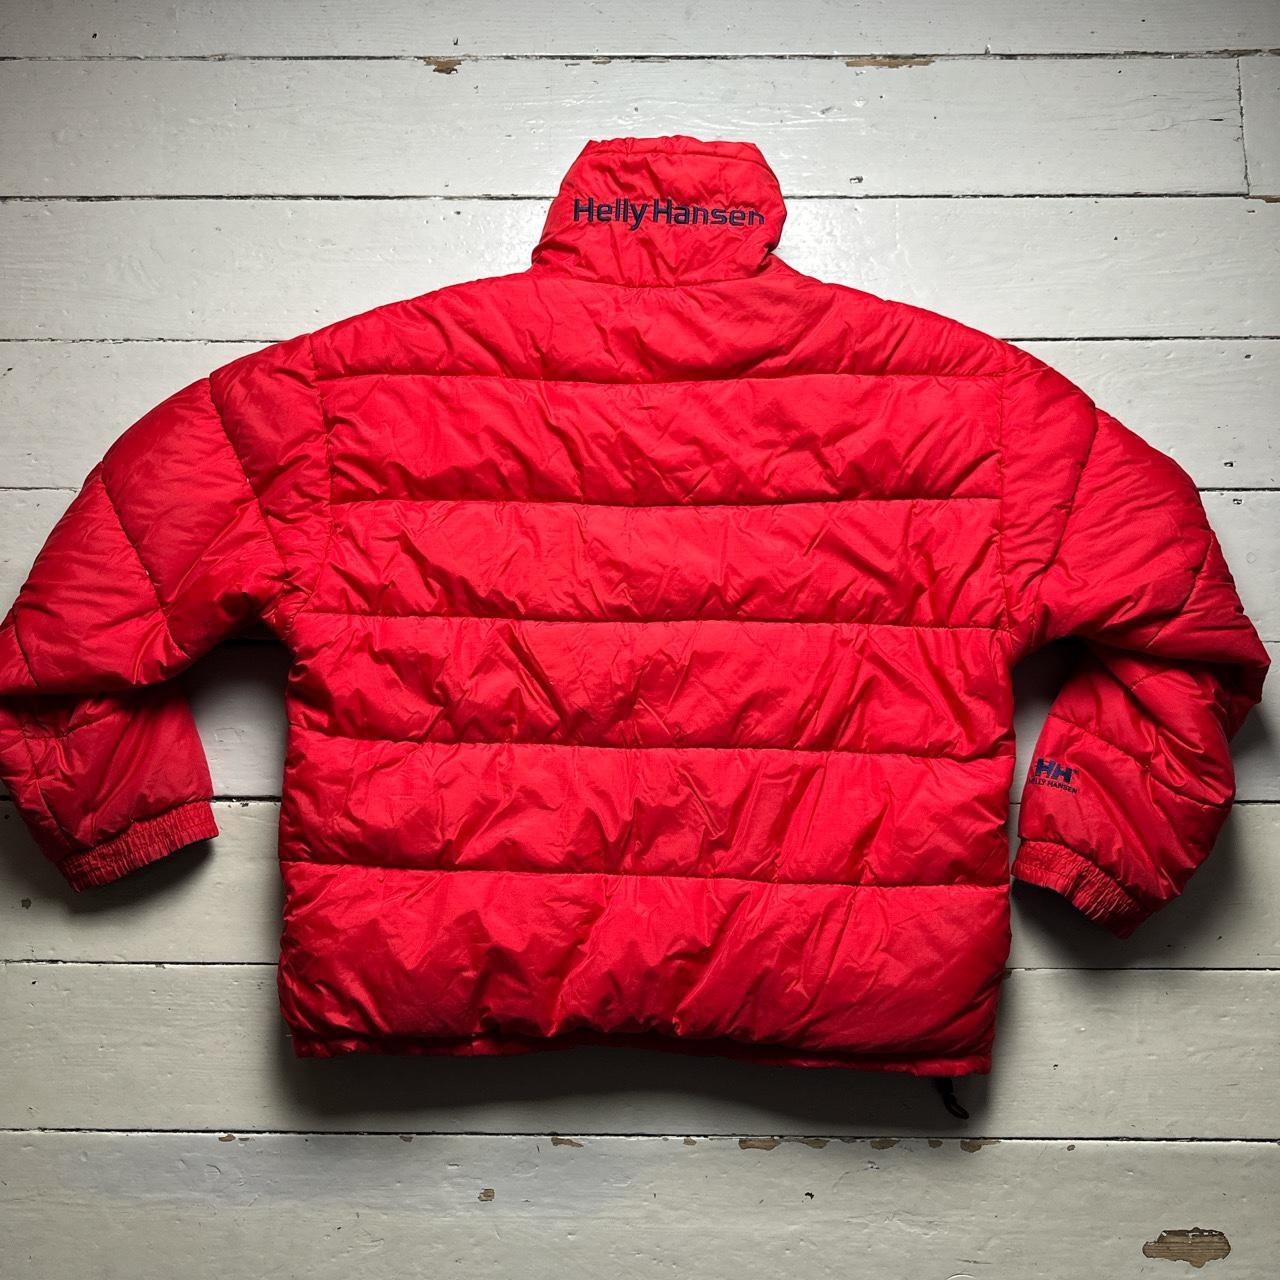 Helly Hansen Reversible Navy and Red Puffer Jacket